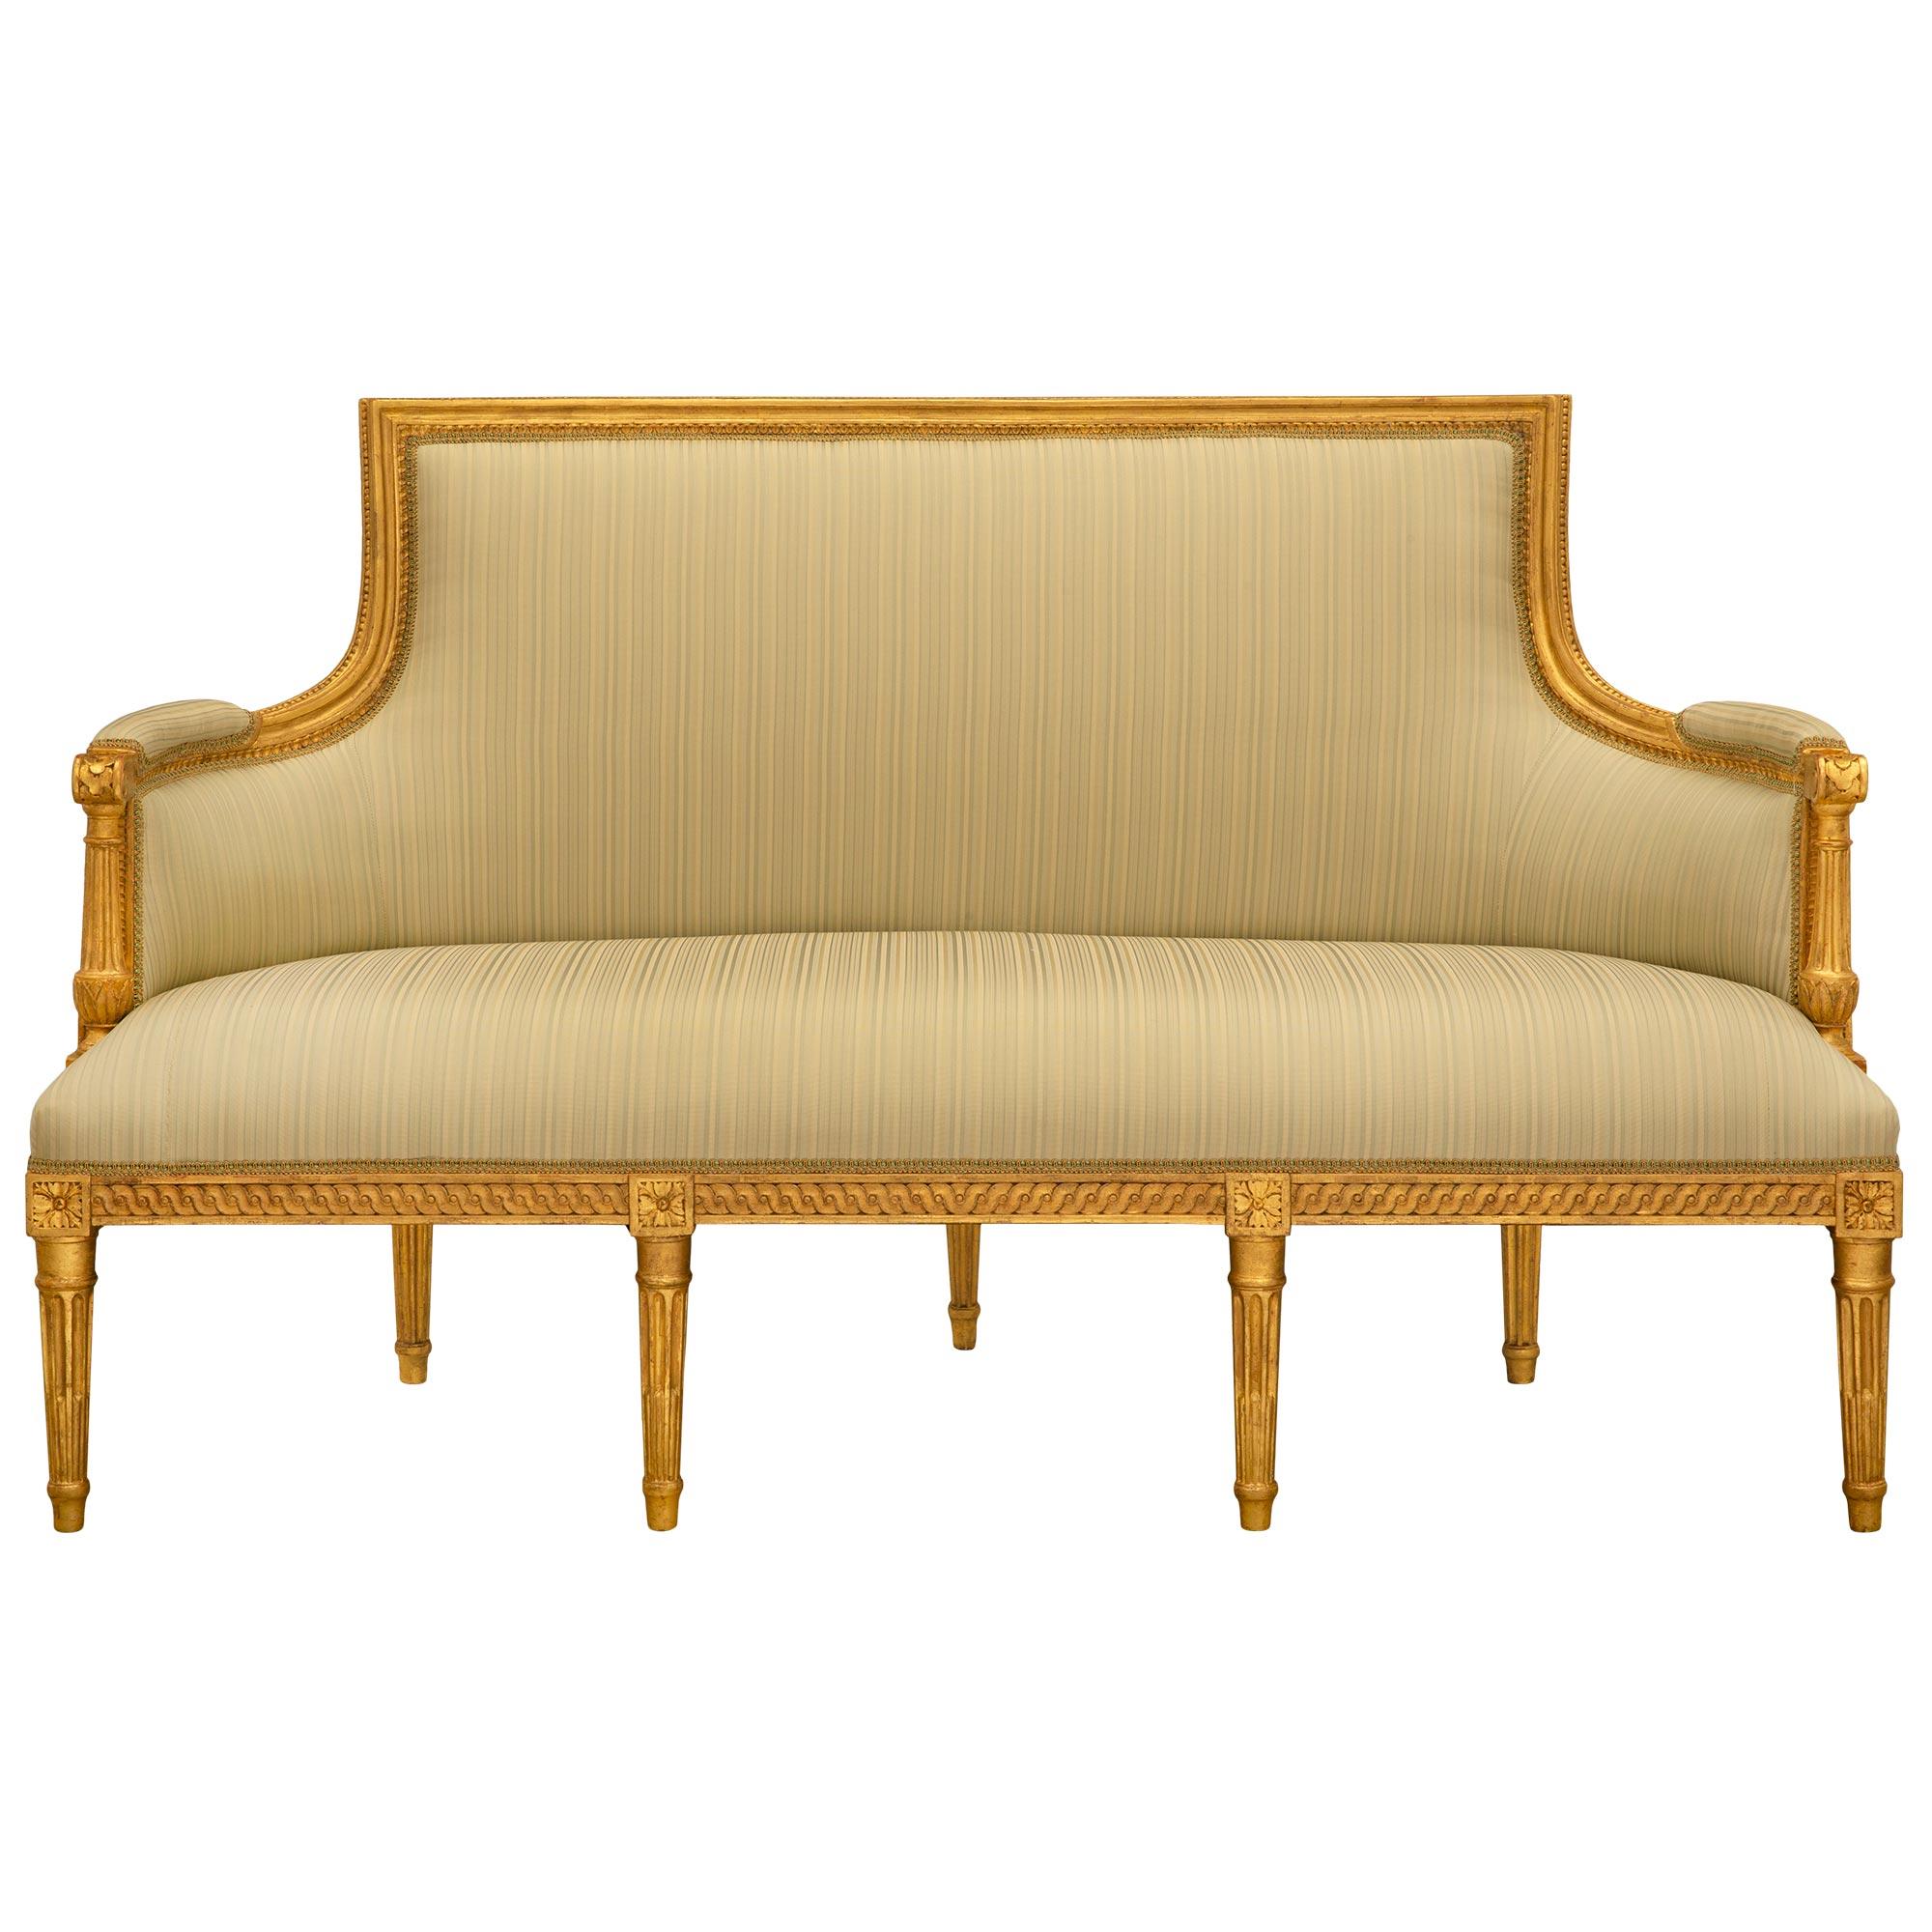 French 18th Century Louis XVI Period Giltwood Canapé Settee For Sale 5